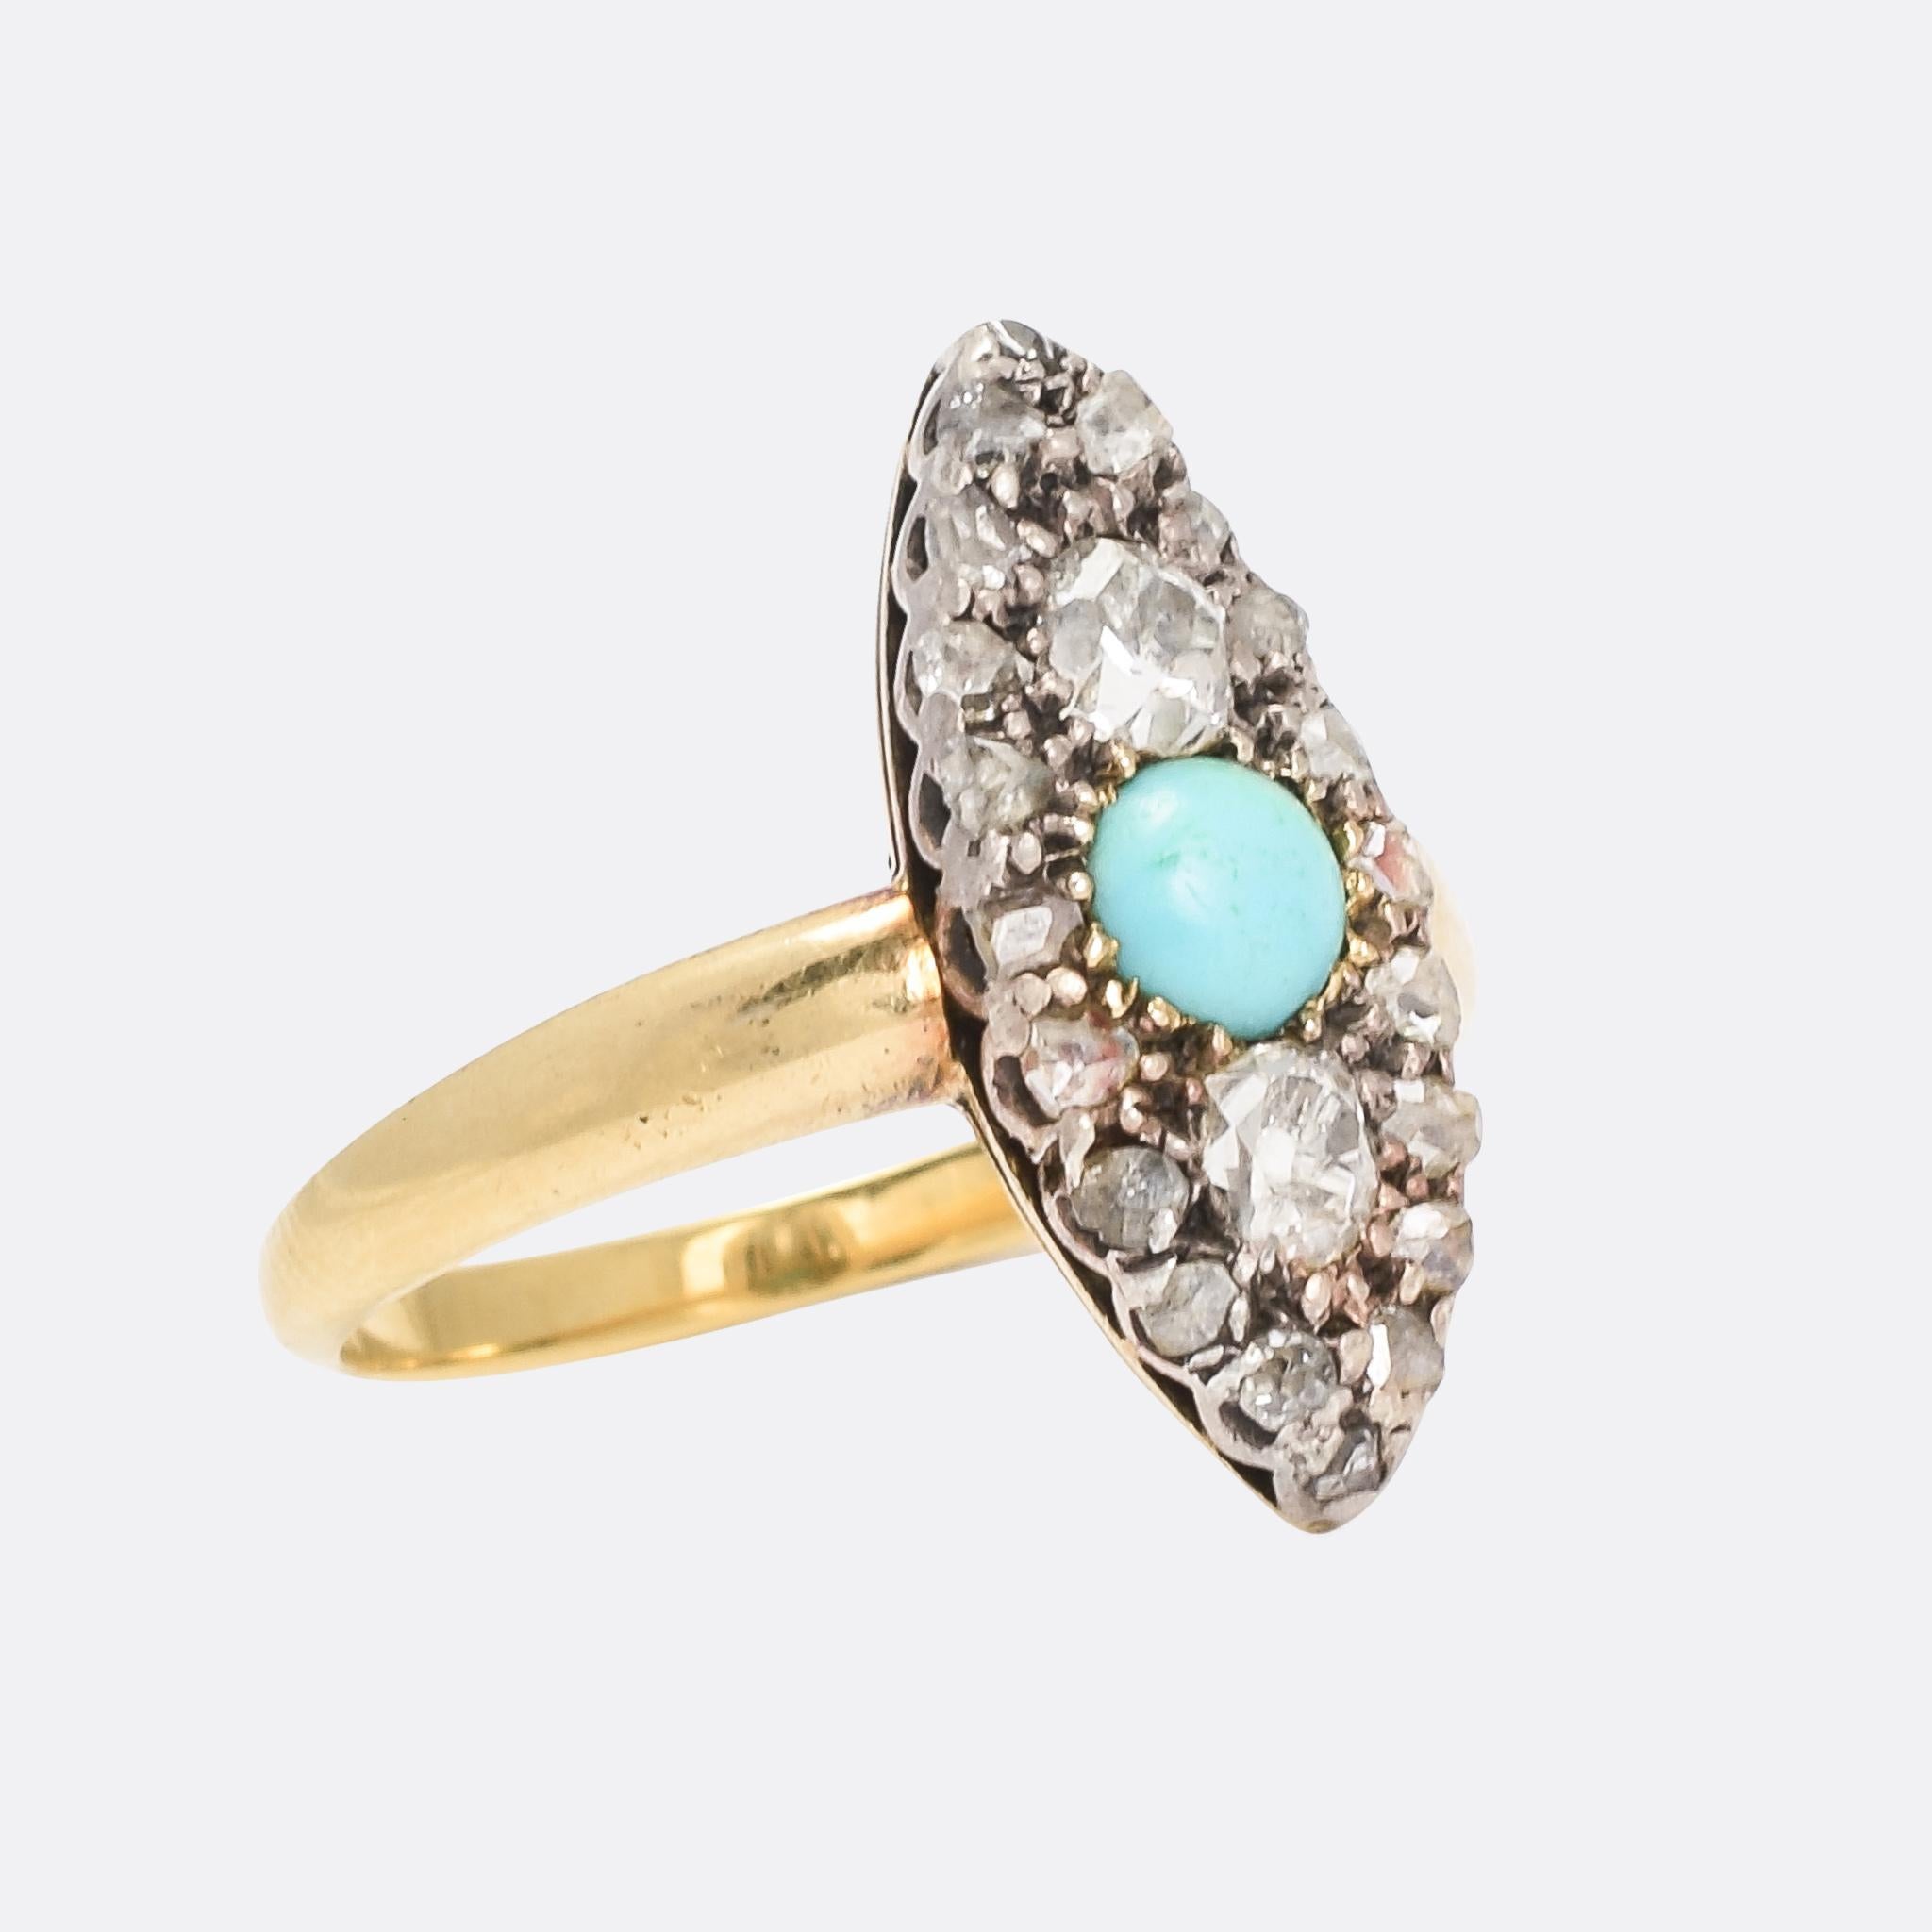 A pretty Victorian Turquoise & Diamond marquise cluster ring dating from the 1880s. The principal turquoise displays excellent colour, flanked by two cushion cut diamonds and set within a cluster of smaller rose cut diamonds. It's finely worked,